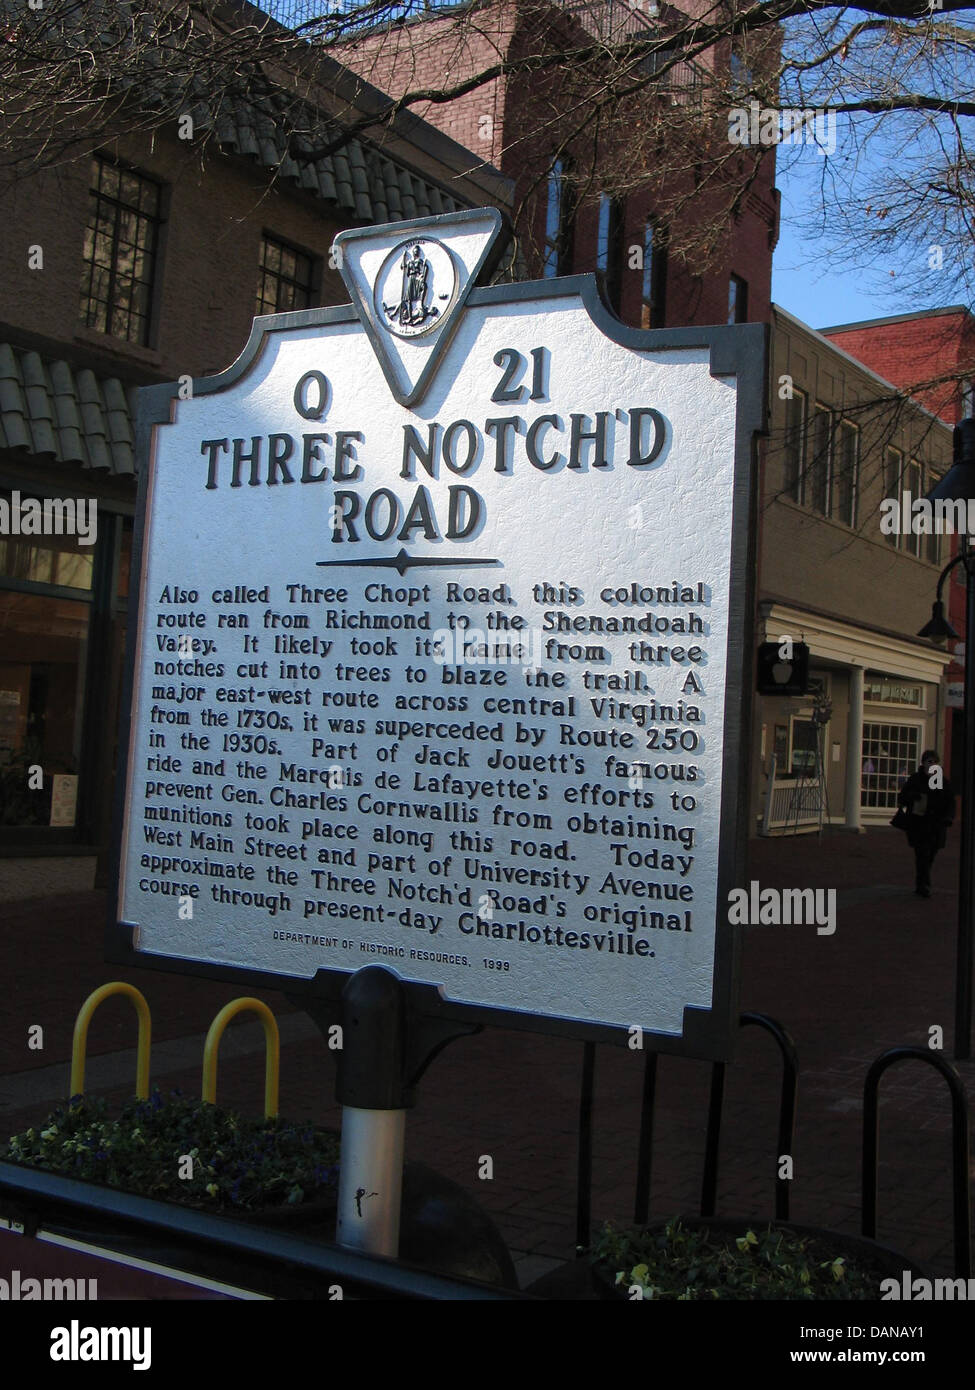 THREE NOTCH'D ROAD  Also called Three Chopt Road, this colonial route ran from Richmond to the Shenandoah Valley. It likely took Stock Photo